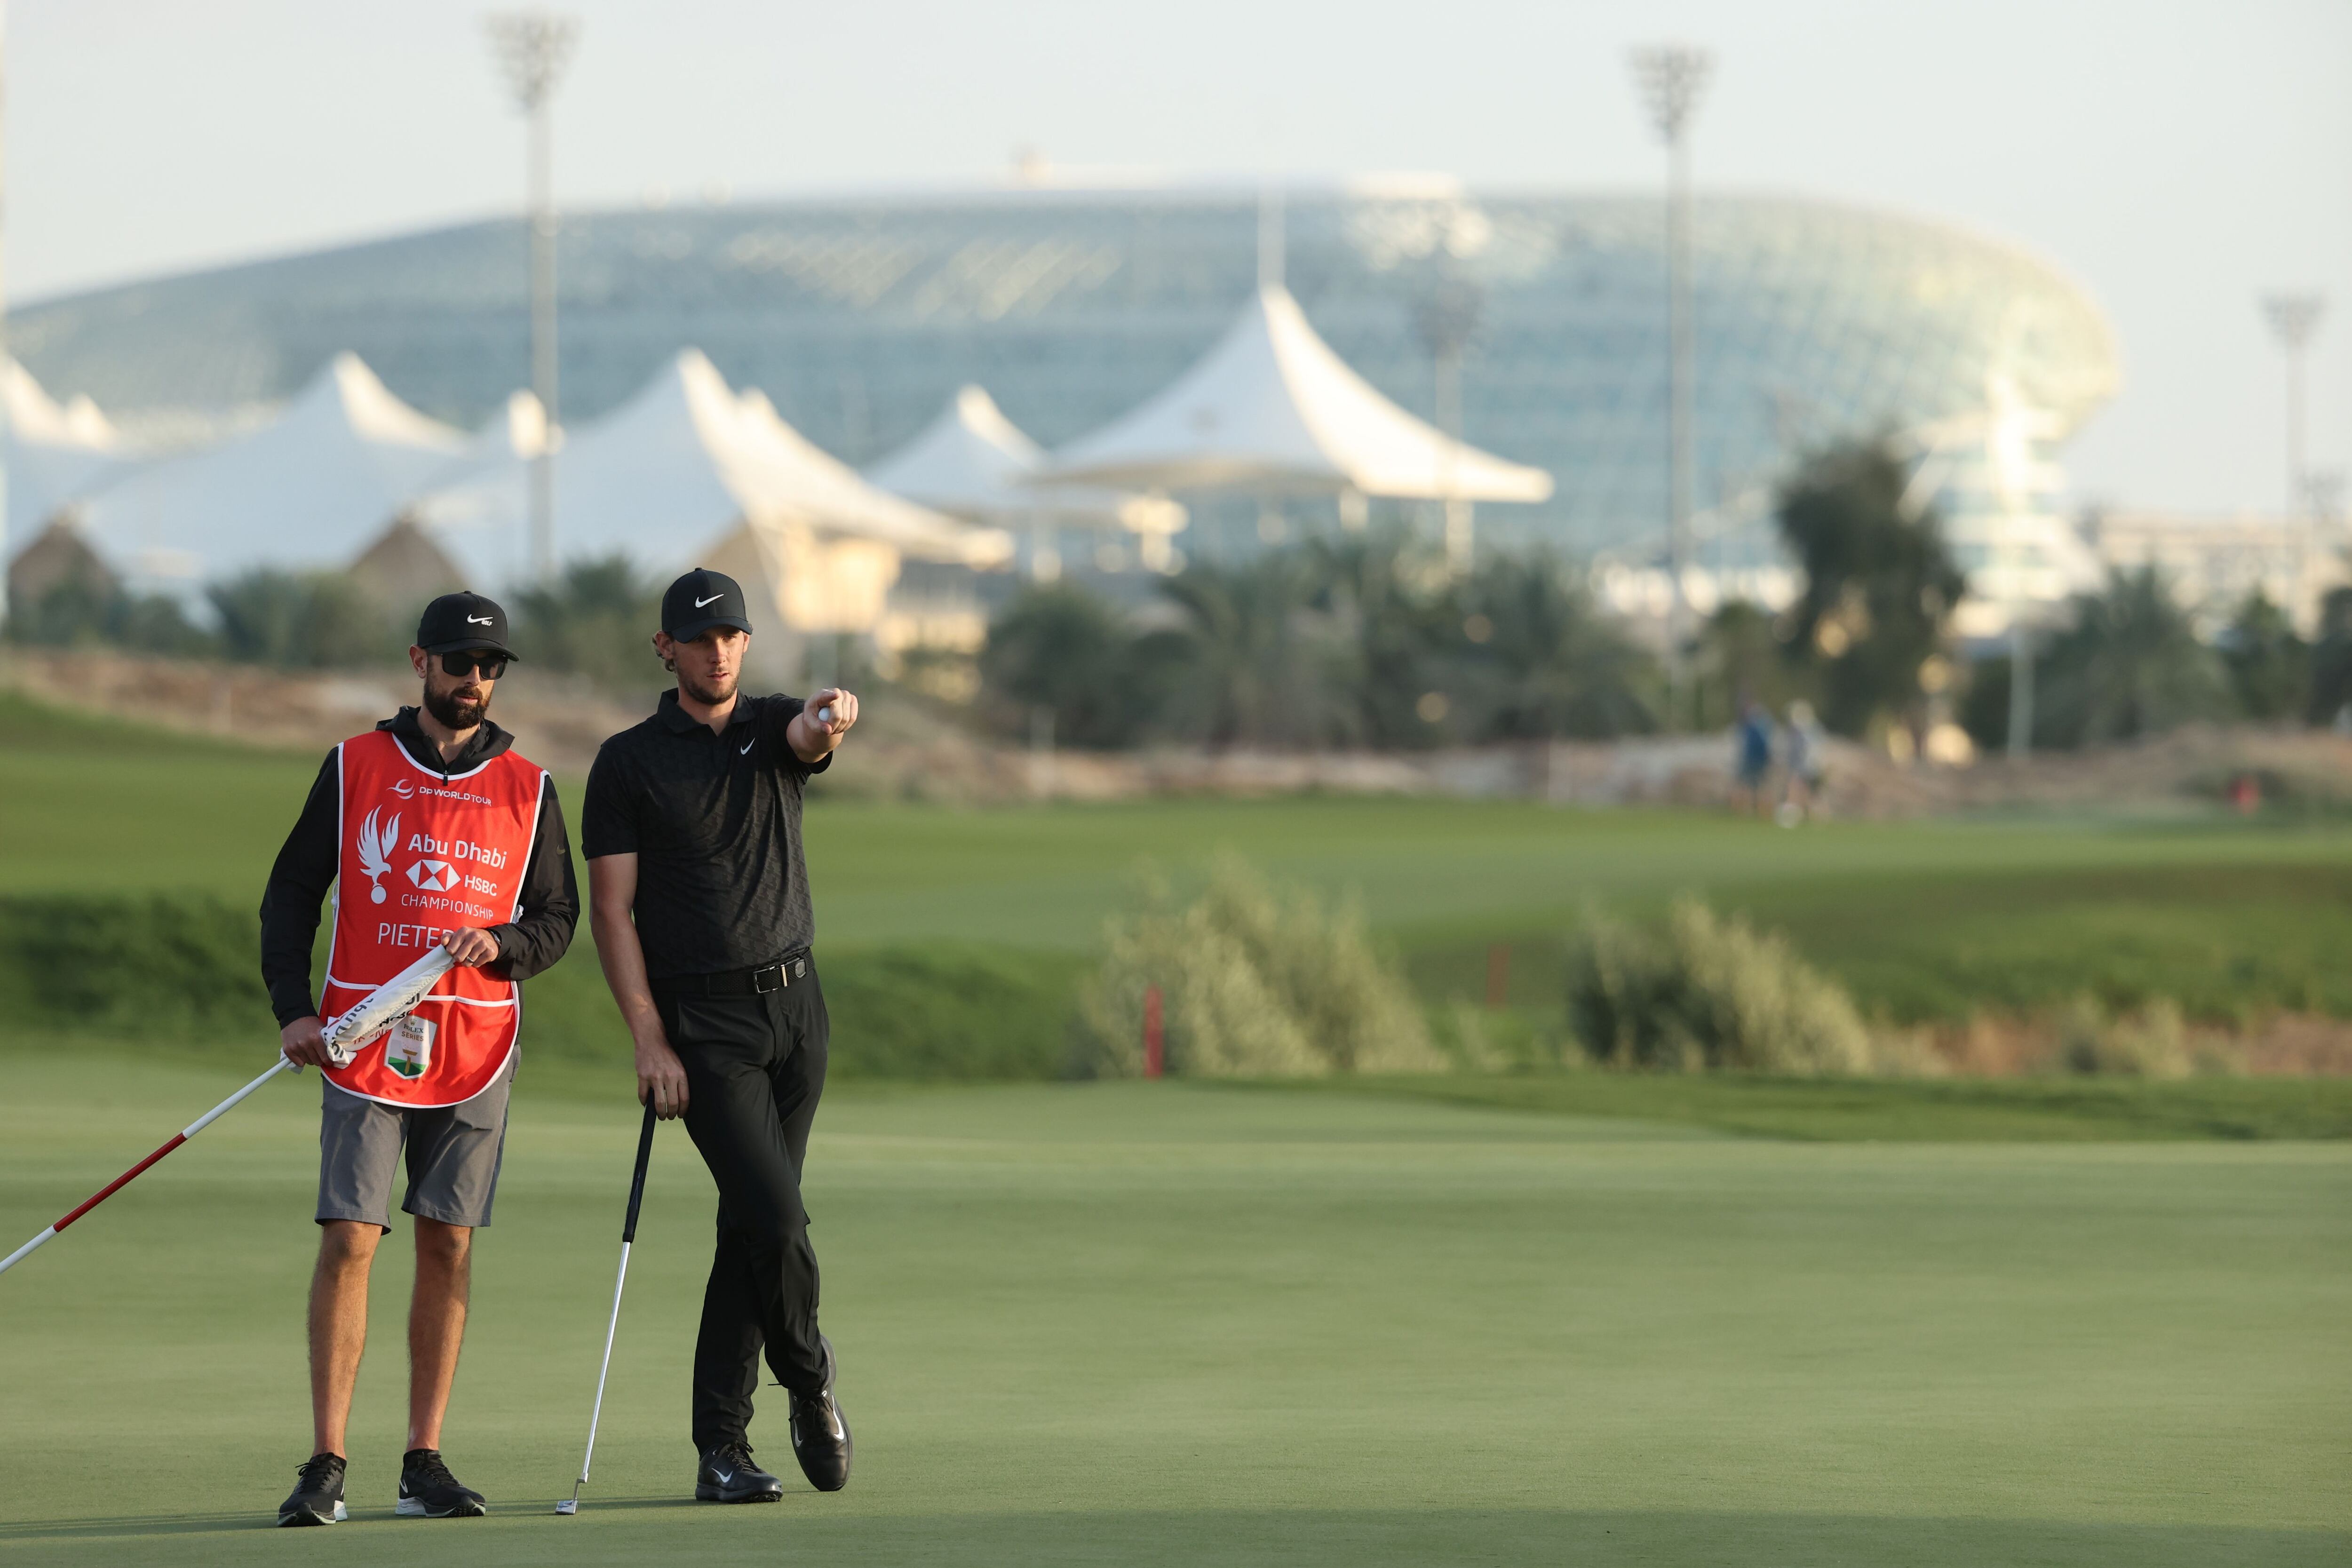 Abu Dhabi Masters 2023 17 - 22 OCTOBER $120,000 PRIZE MONEY Day 2 R32